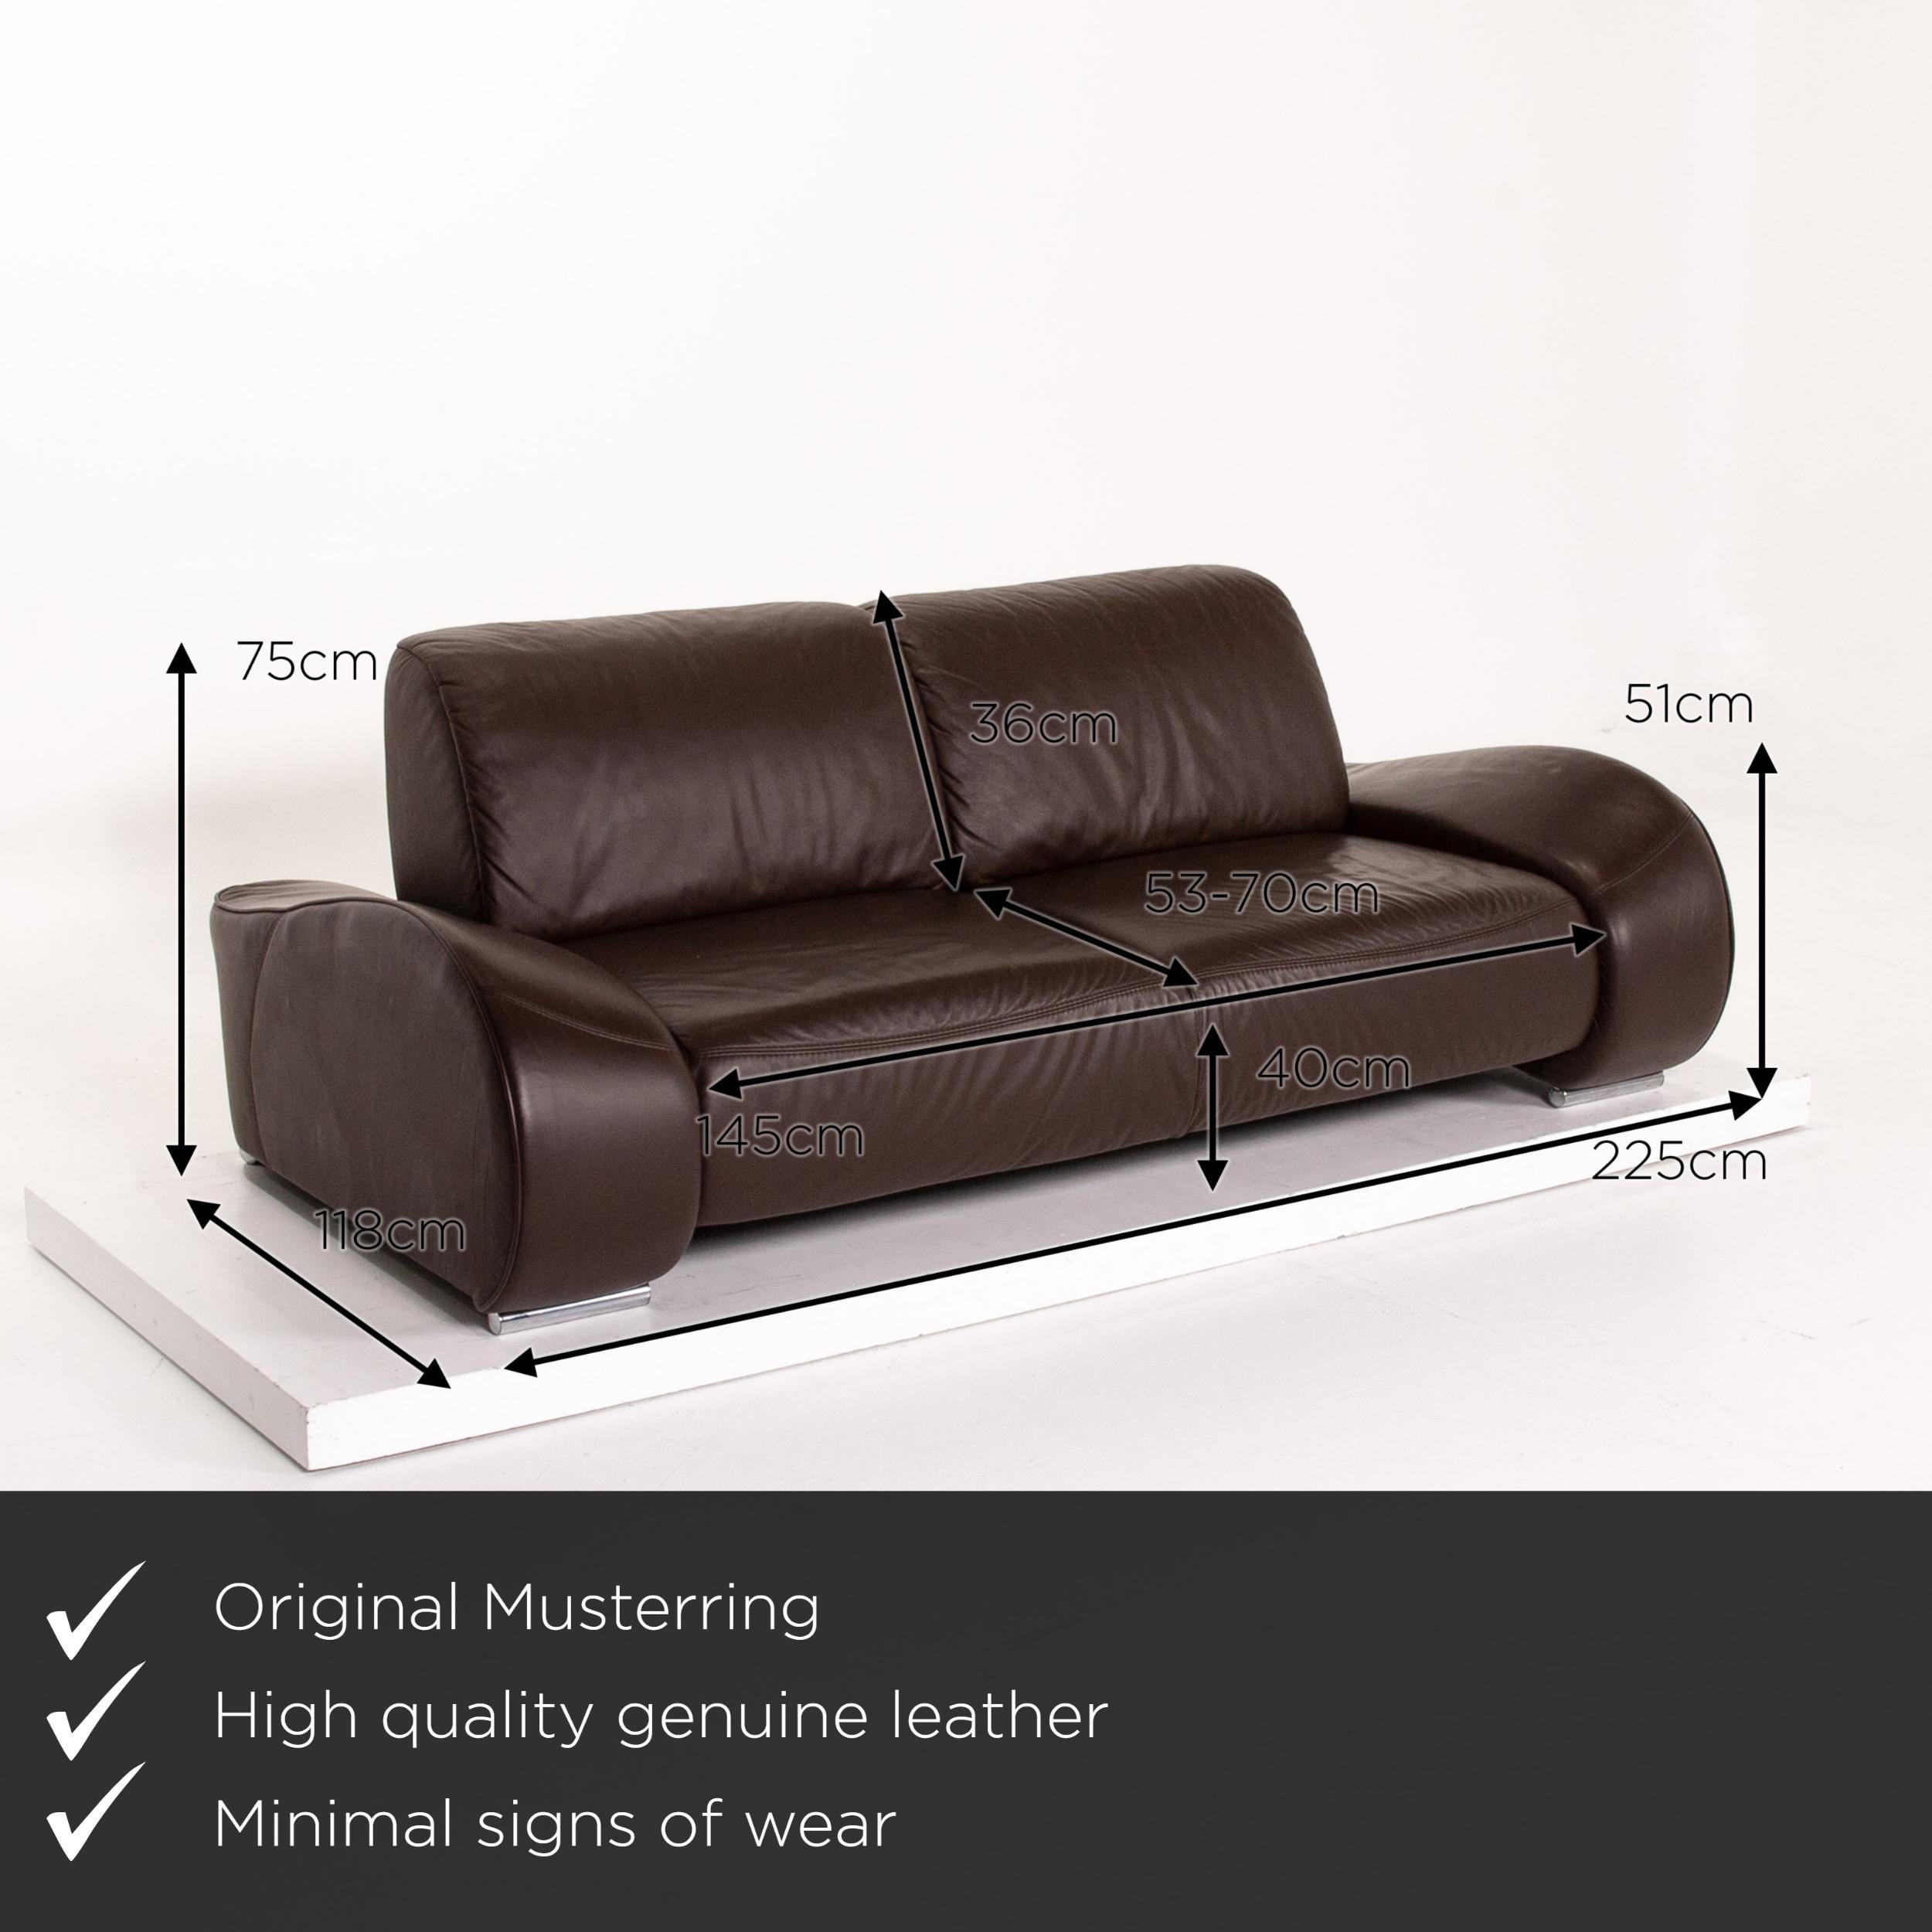 We present to you a sample ring leather sofa brown dark brown two-seat couch.

 

 Product measurements in centimeters:
 

Depth 118
Width 205
Height 75
Seat height 40
Rest height 51
Seat depth 53
Seat width 145
Back height 36.
  